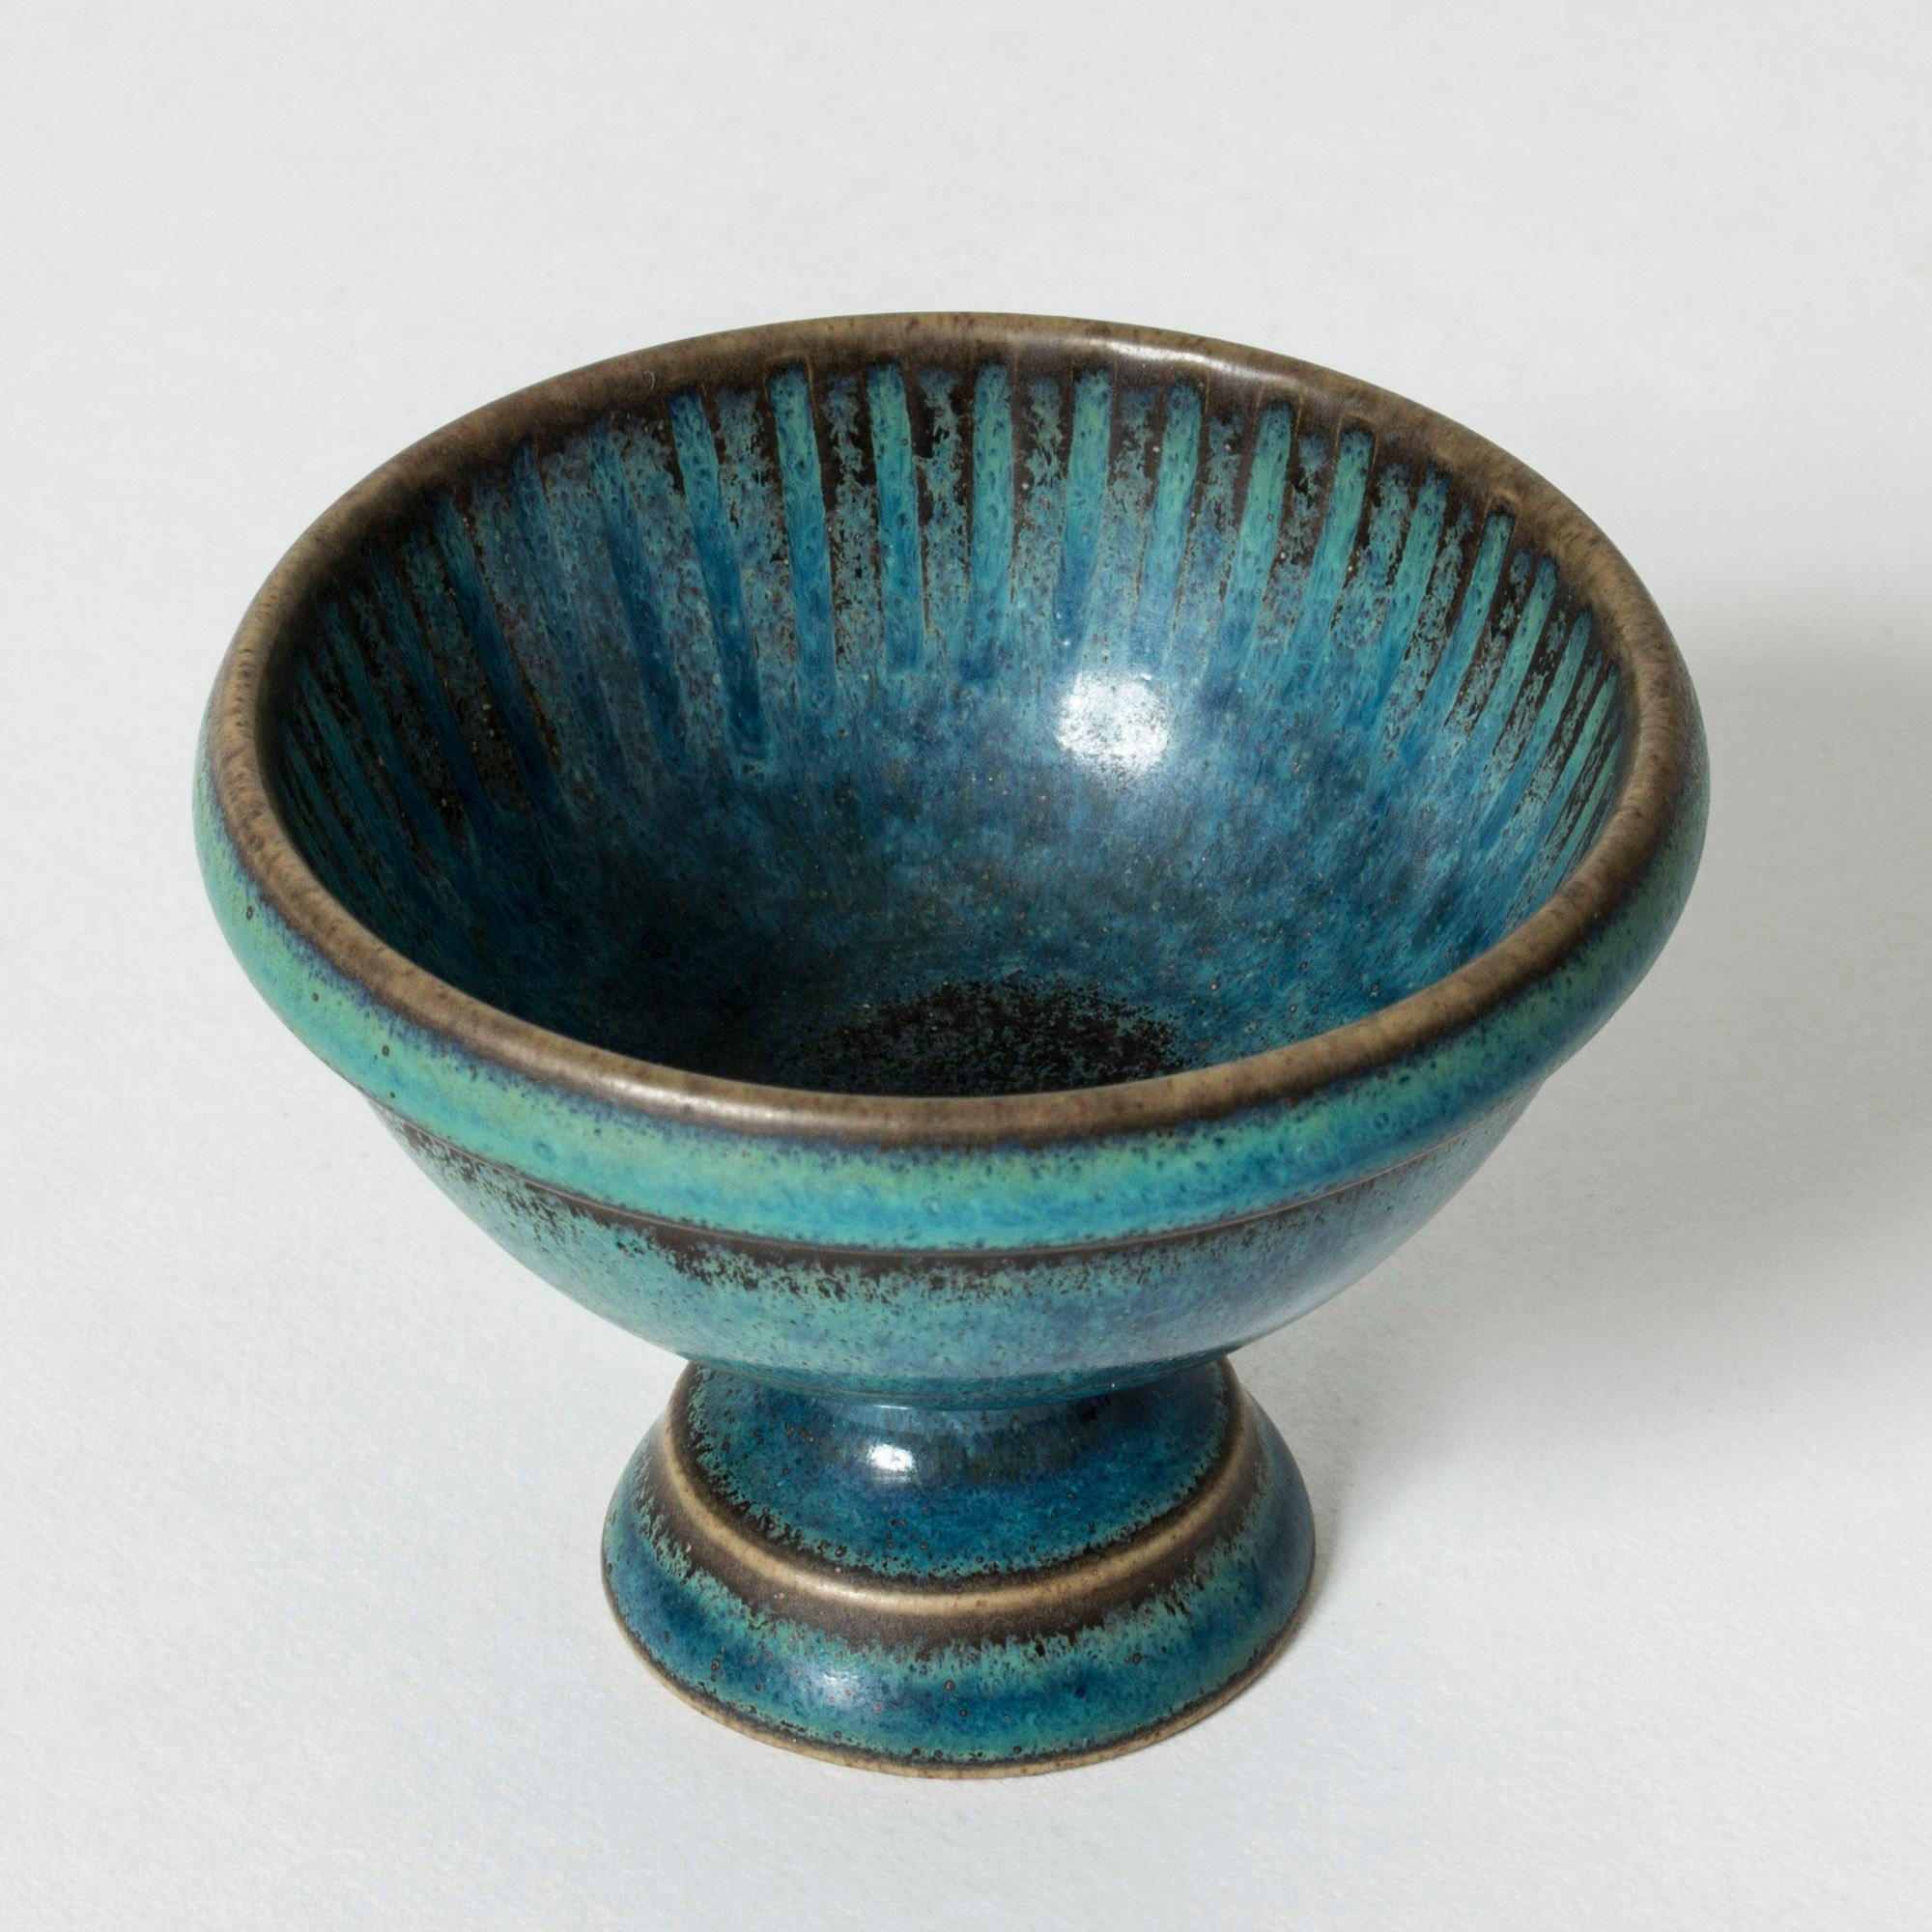 Cute unique stoneware bowl on foot by Stig Lindberg. Vibrant blue glaze and a graphic embossed pattern.